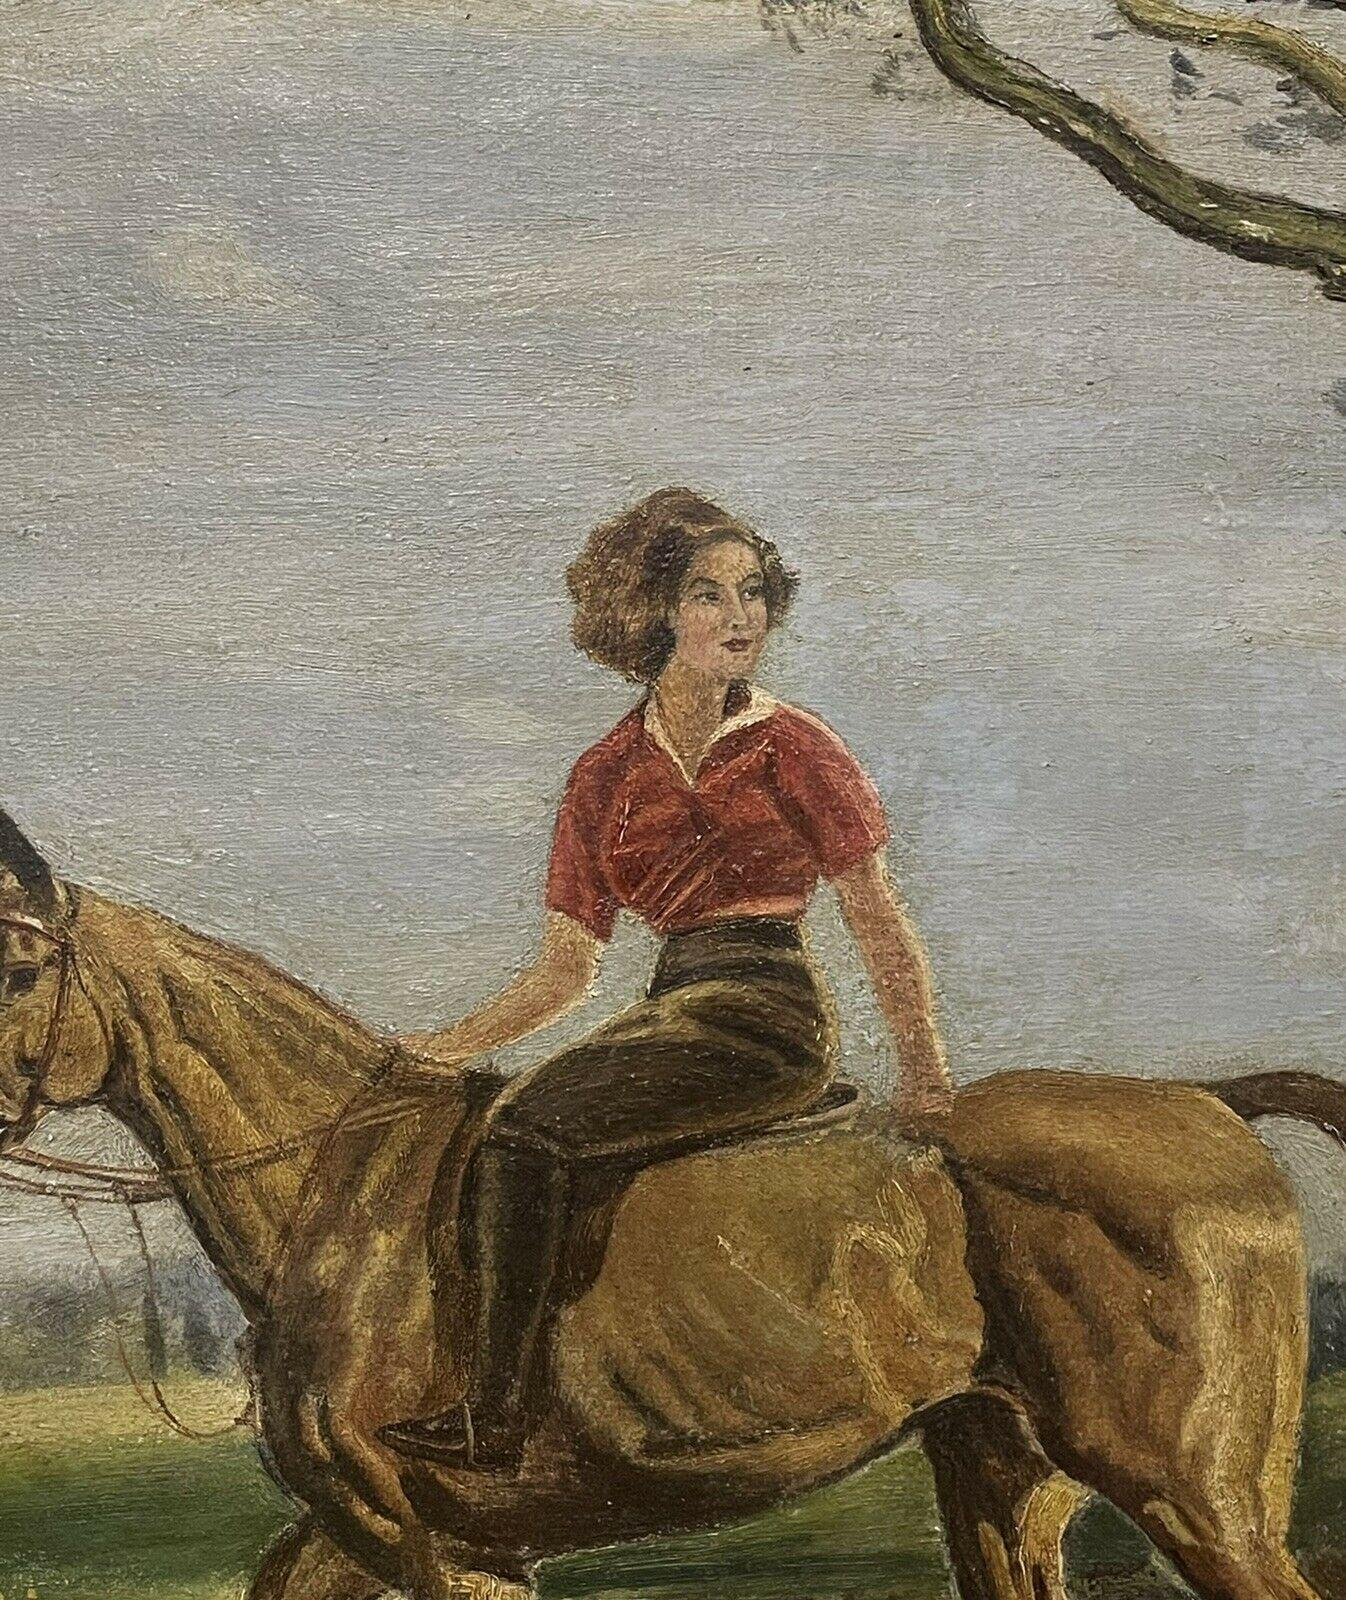 Artist/ School: English School, mid 20th century, indistinctly signed

Title: Portrait of a young lady, riding on her horse in a landscape, with terrier dog. 

Medium: oil painting on board, framed

Size:

framed: 21 x 27 inches
canvas: 16 x 22